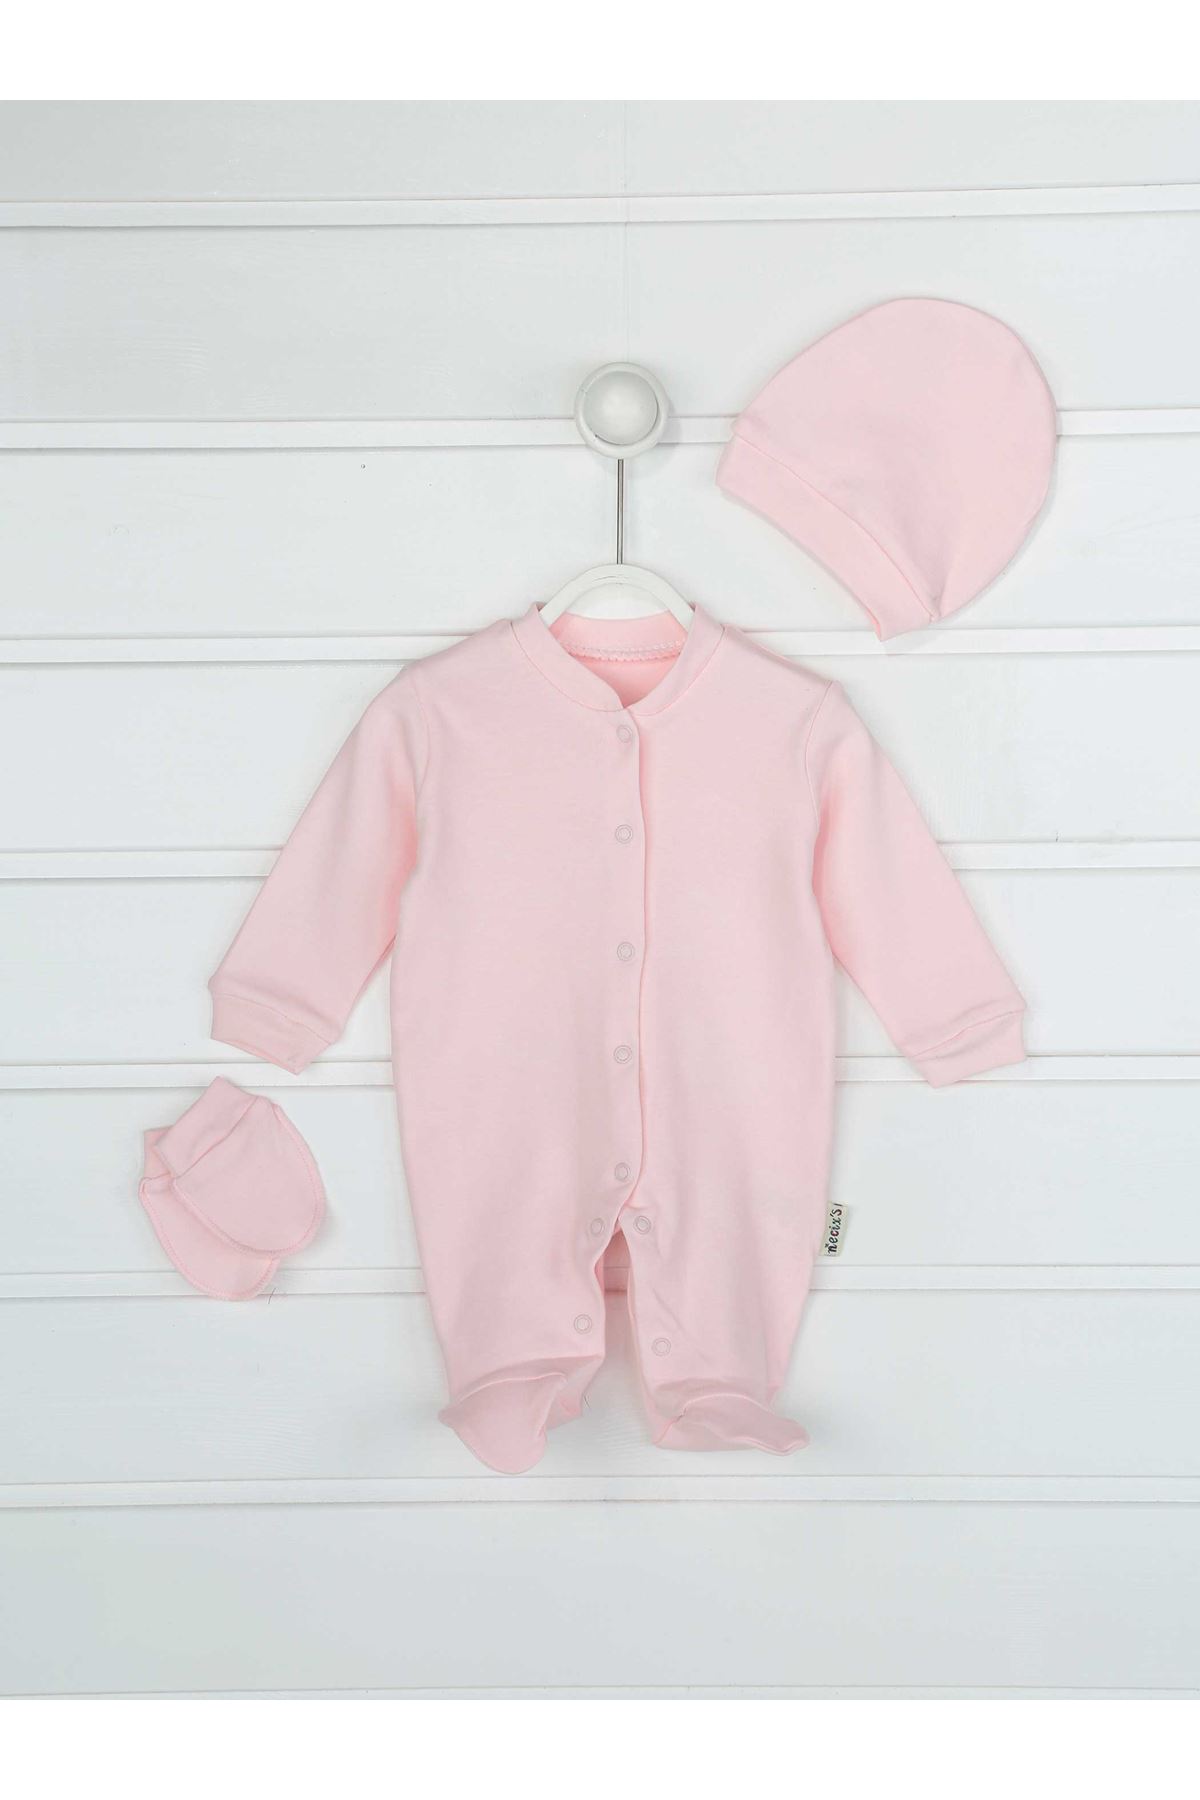 Pink baby girl solid color 3-piece suit overalls gloves hat infants cotton comfortable daily newborn hospital outlet models